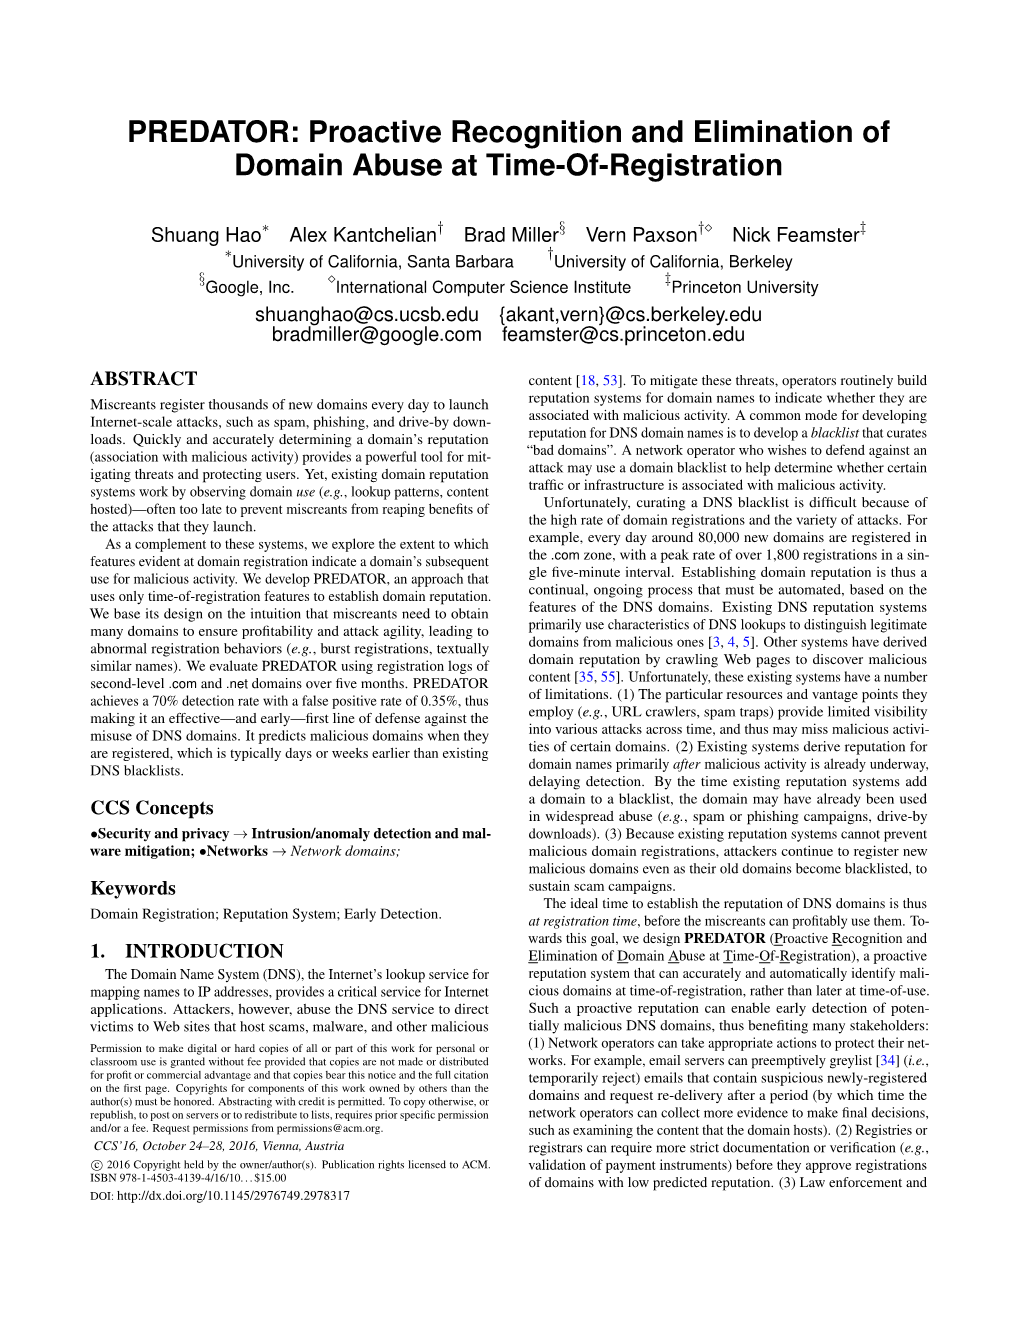 Proactive Recognition and Elimination of Domain Abuse at Time-Of-Registration